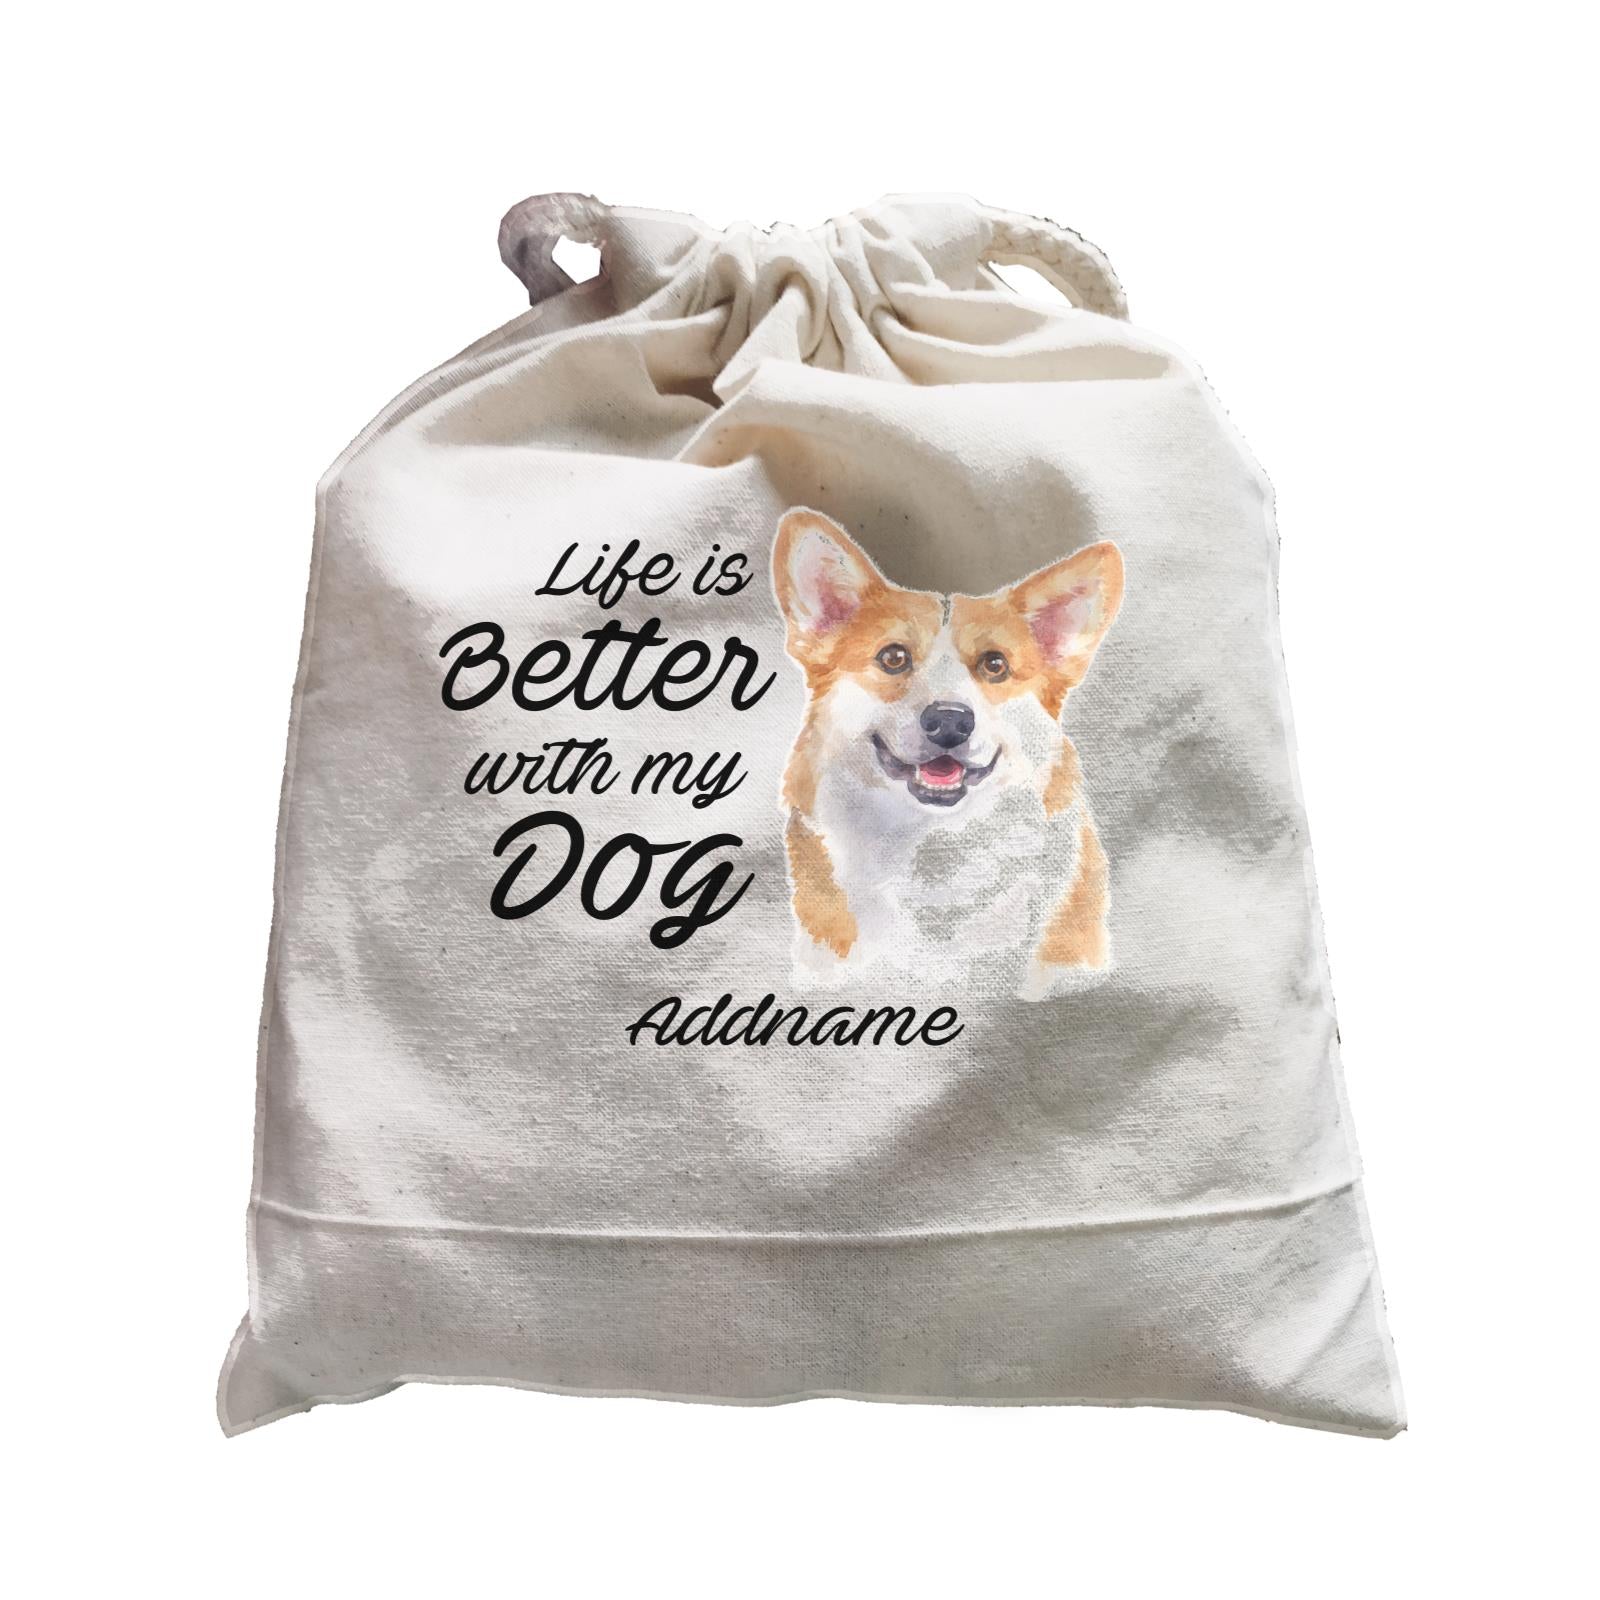 Watercolor Life is Better With My Dog Welsh Corgi Smile Addname Satchel